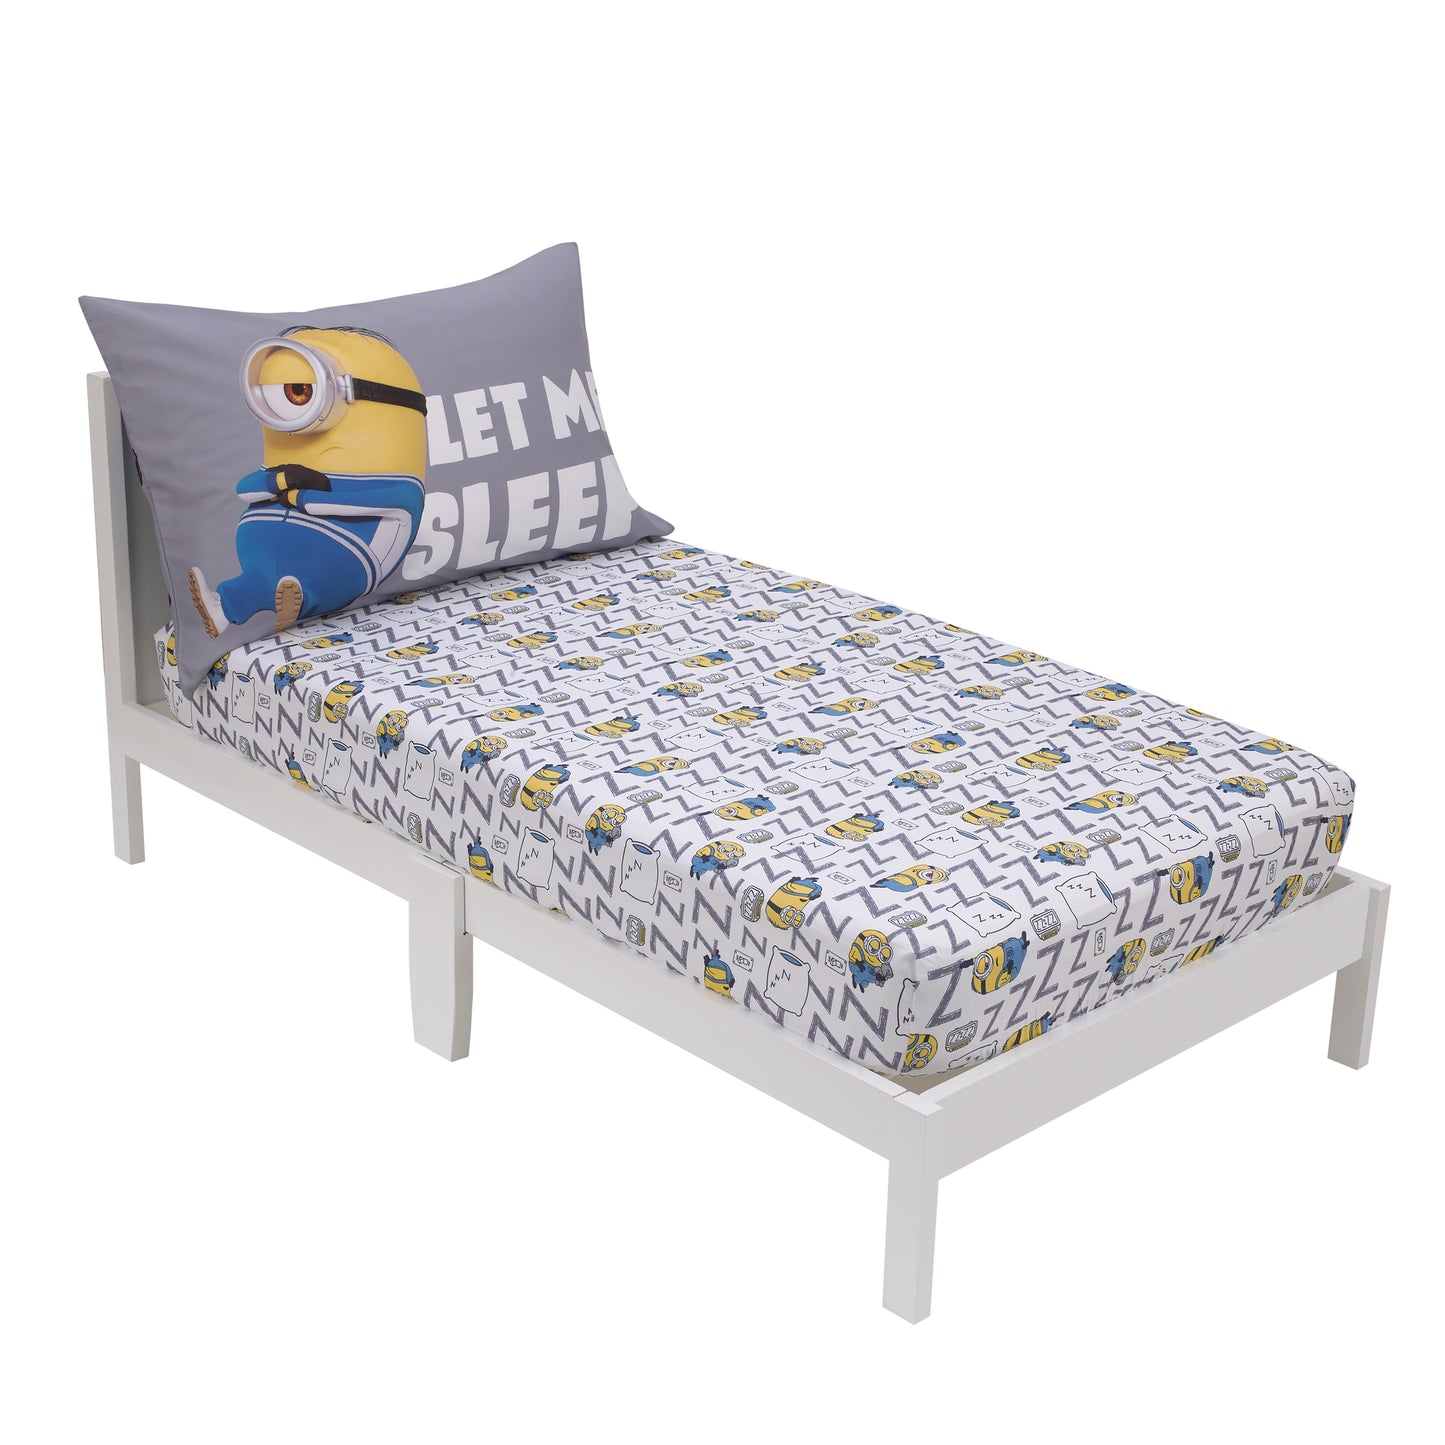 Illumination Lazy Minions Club Gray, Blue, Yellow, and White Let Me Sleep 2 Piece Toddler Sheet Set - Fitted Bottom Sheet, Reversible Pillowcase